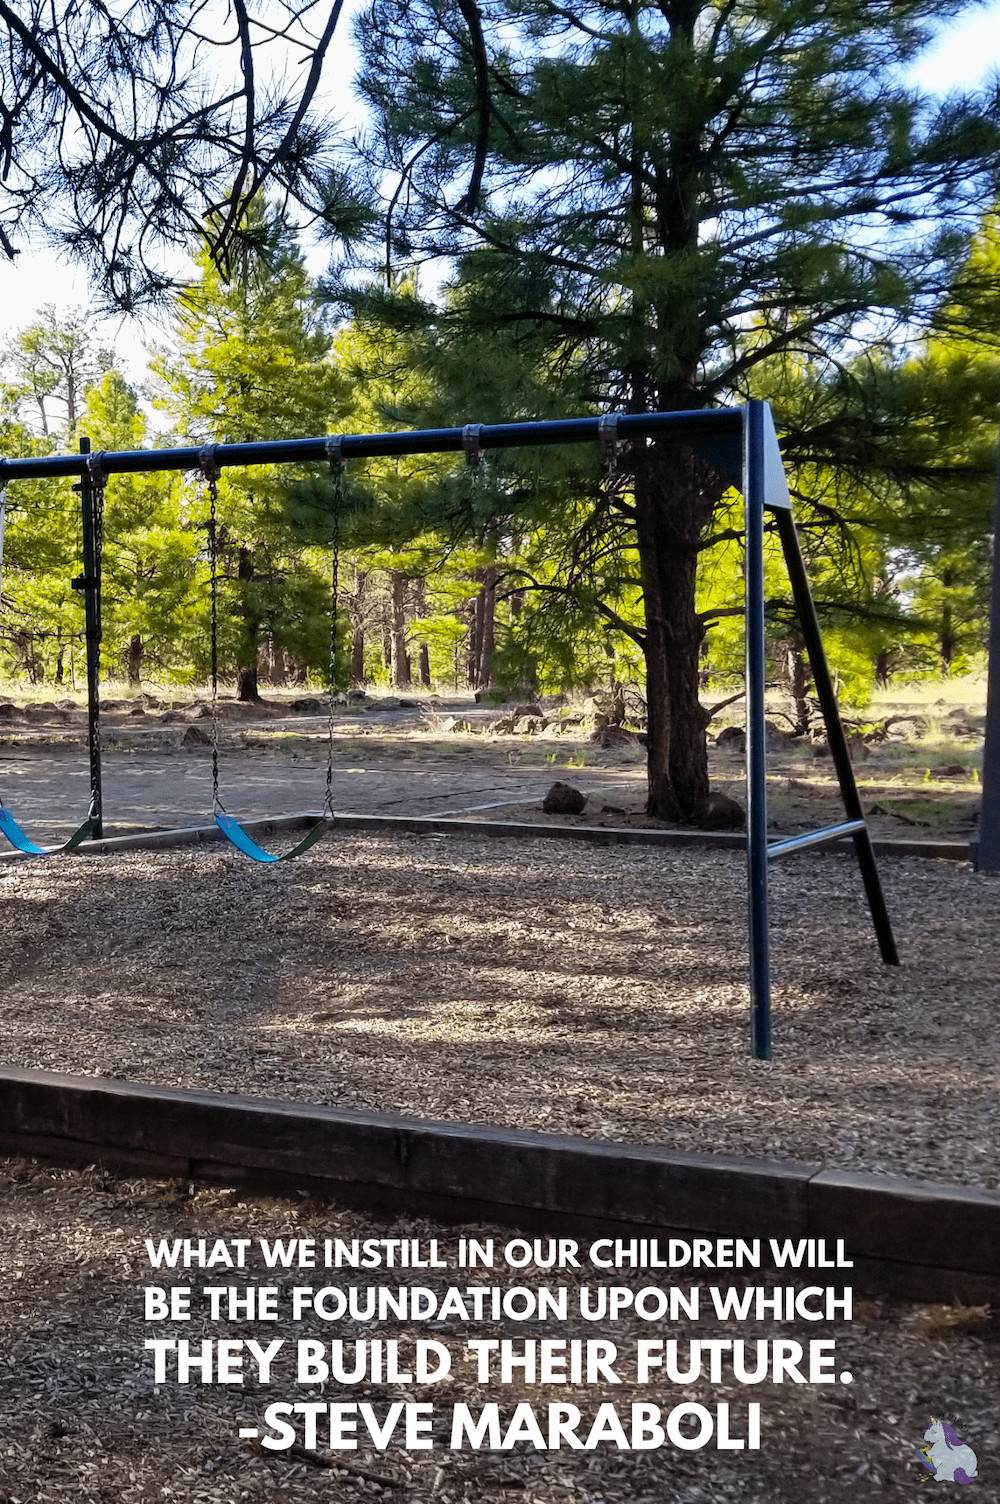 Swing sets in a park with trees. 